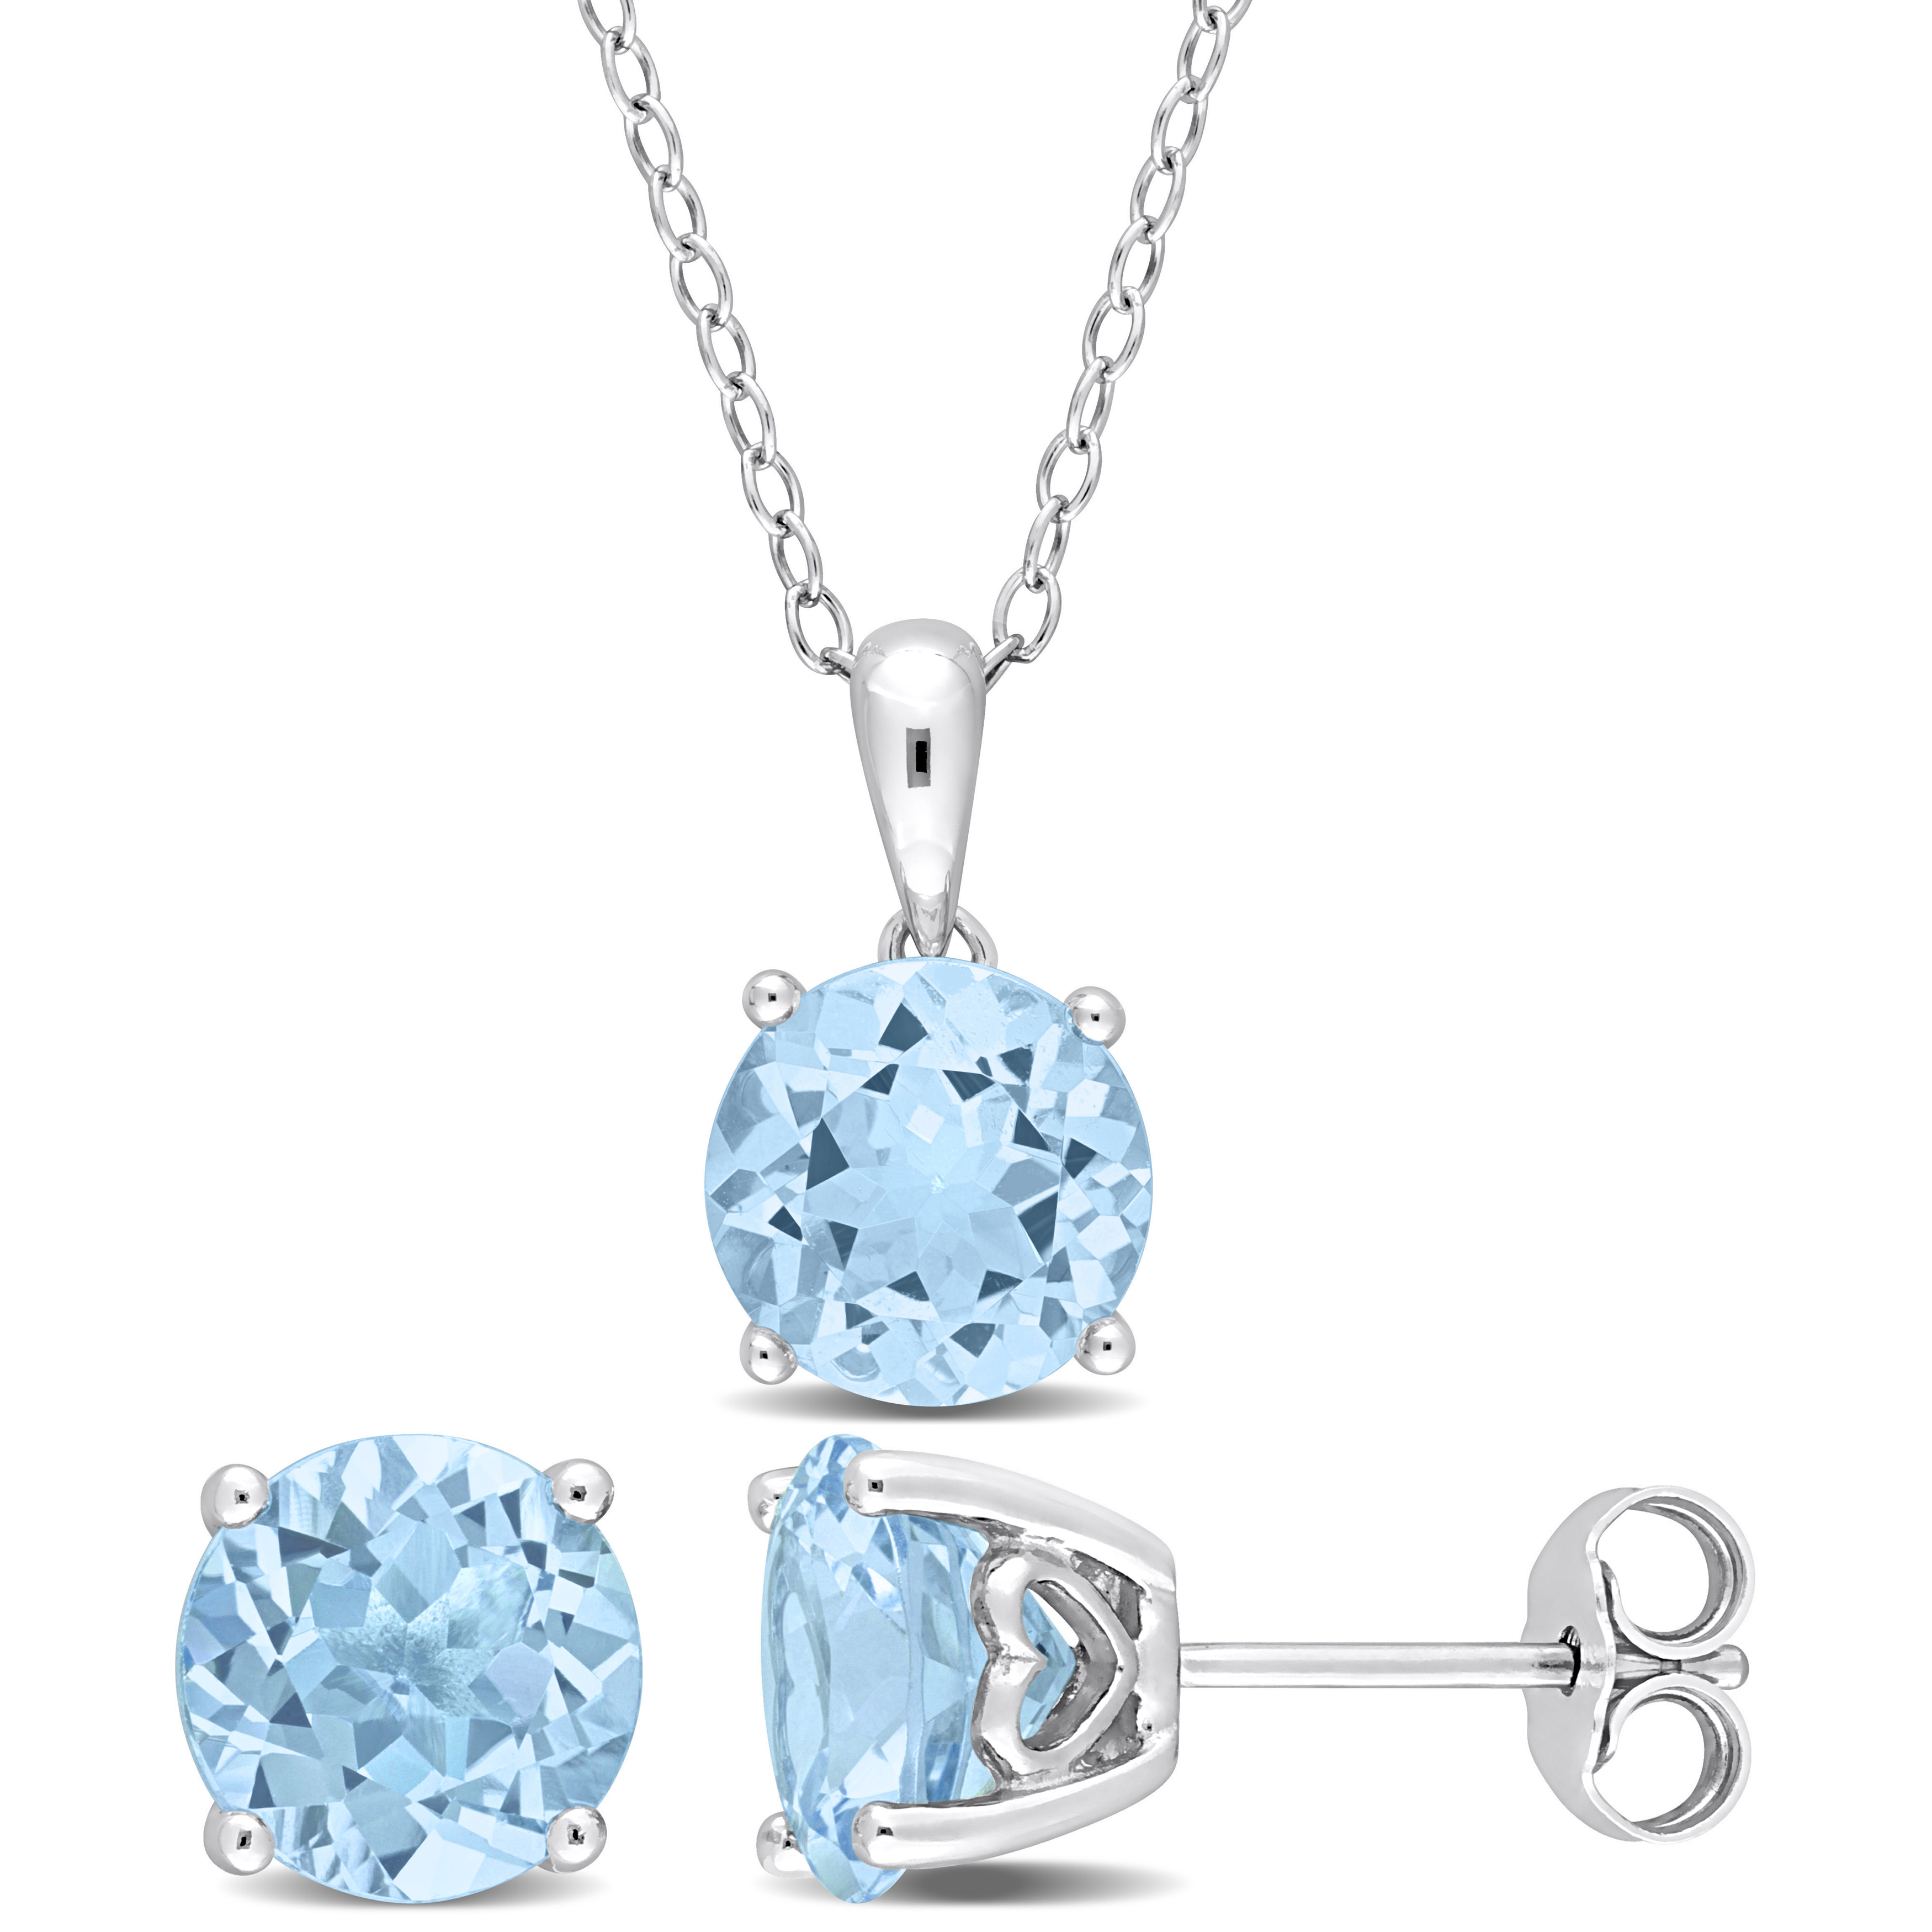 7 CT TGW Sky Blue Topaz 2-Piece Set of Pendant with Chain and Earrings in Sterling Silver